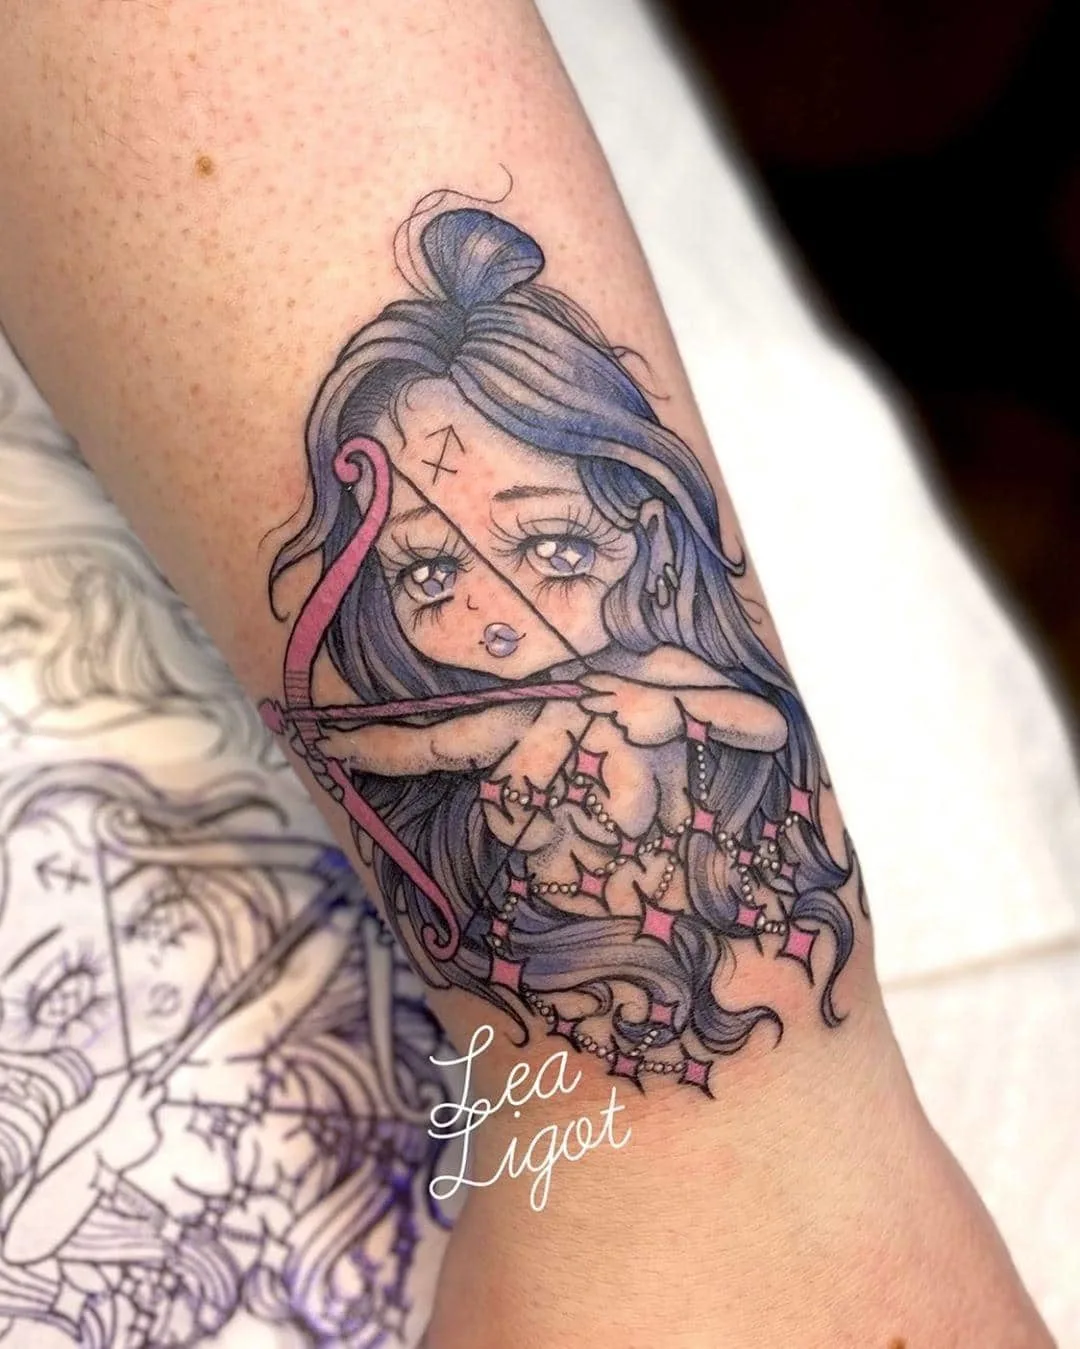 blue haired girl pulling an arrow tattoo on the arm